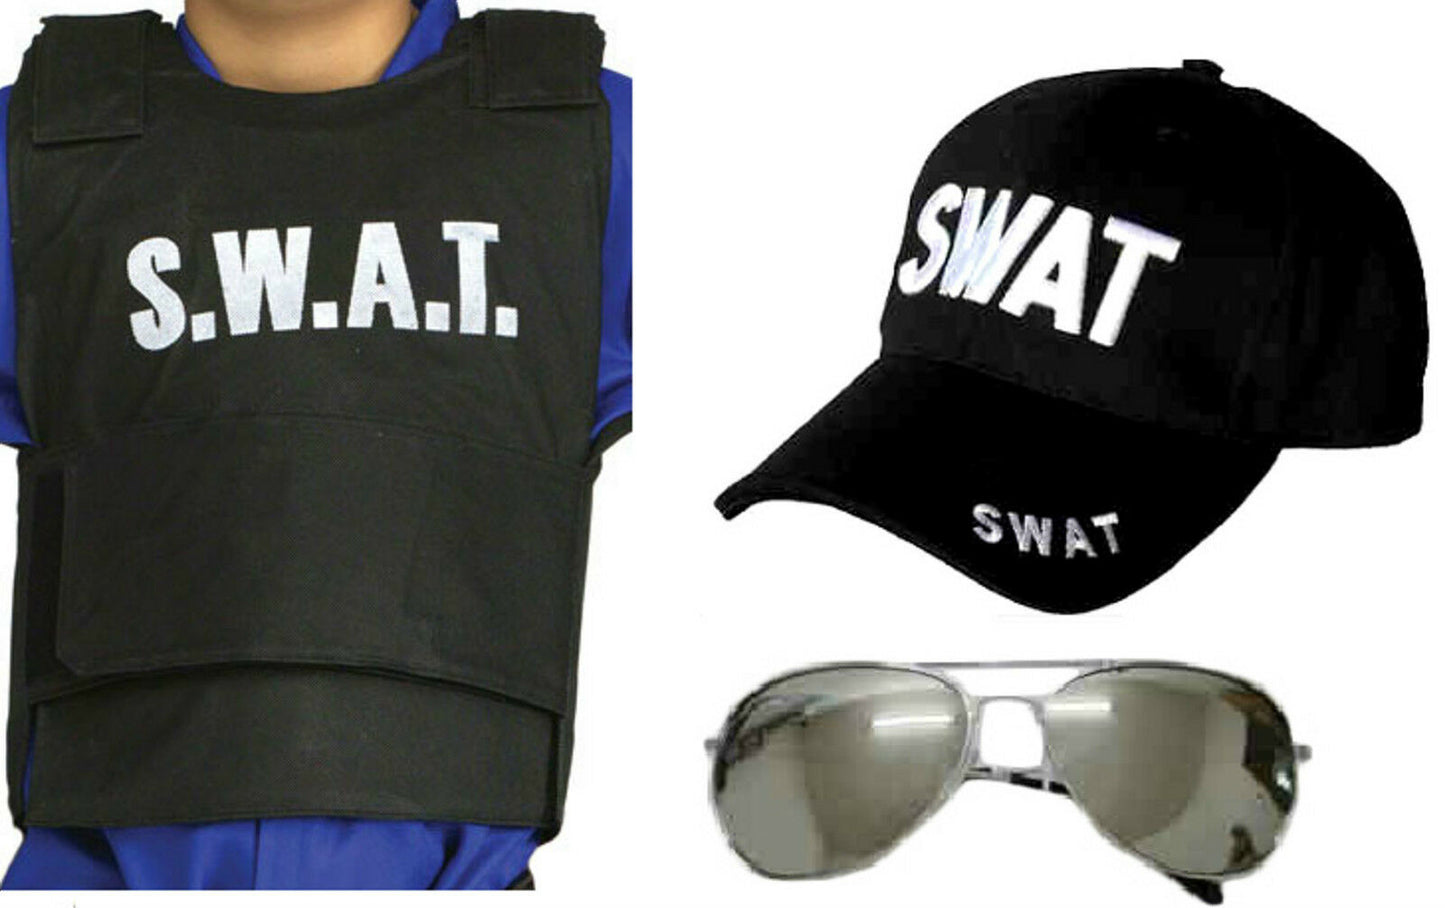 Children's S.W.A.T Fancy Dress / Cosplay Outfit. Ages 5-13. 3 Piece Set Includes Hat, Vest & Glasses. Single Option Of S.W.A.T T-Shirt Available.